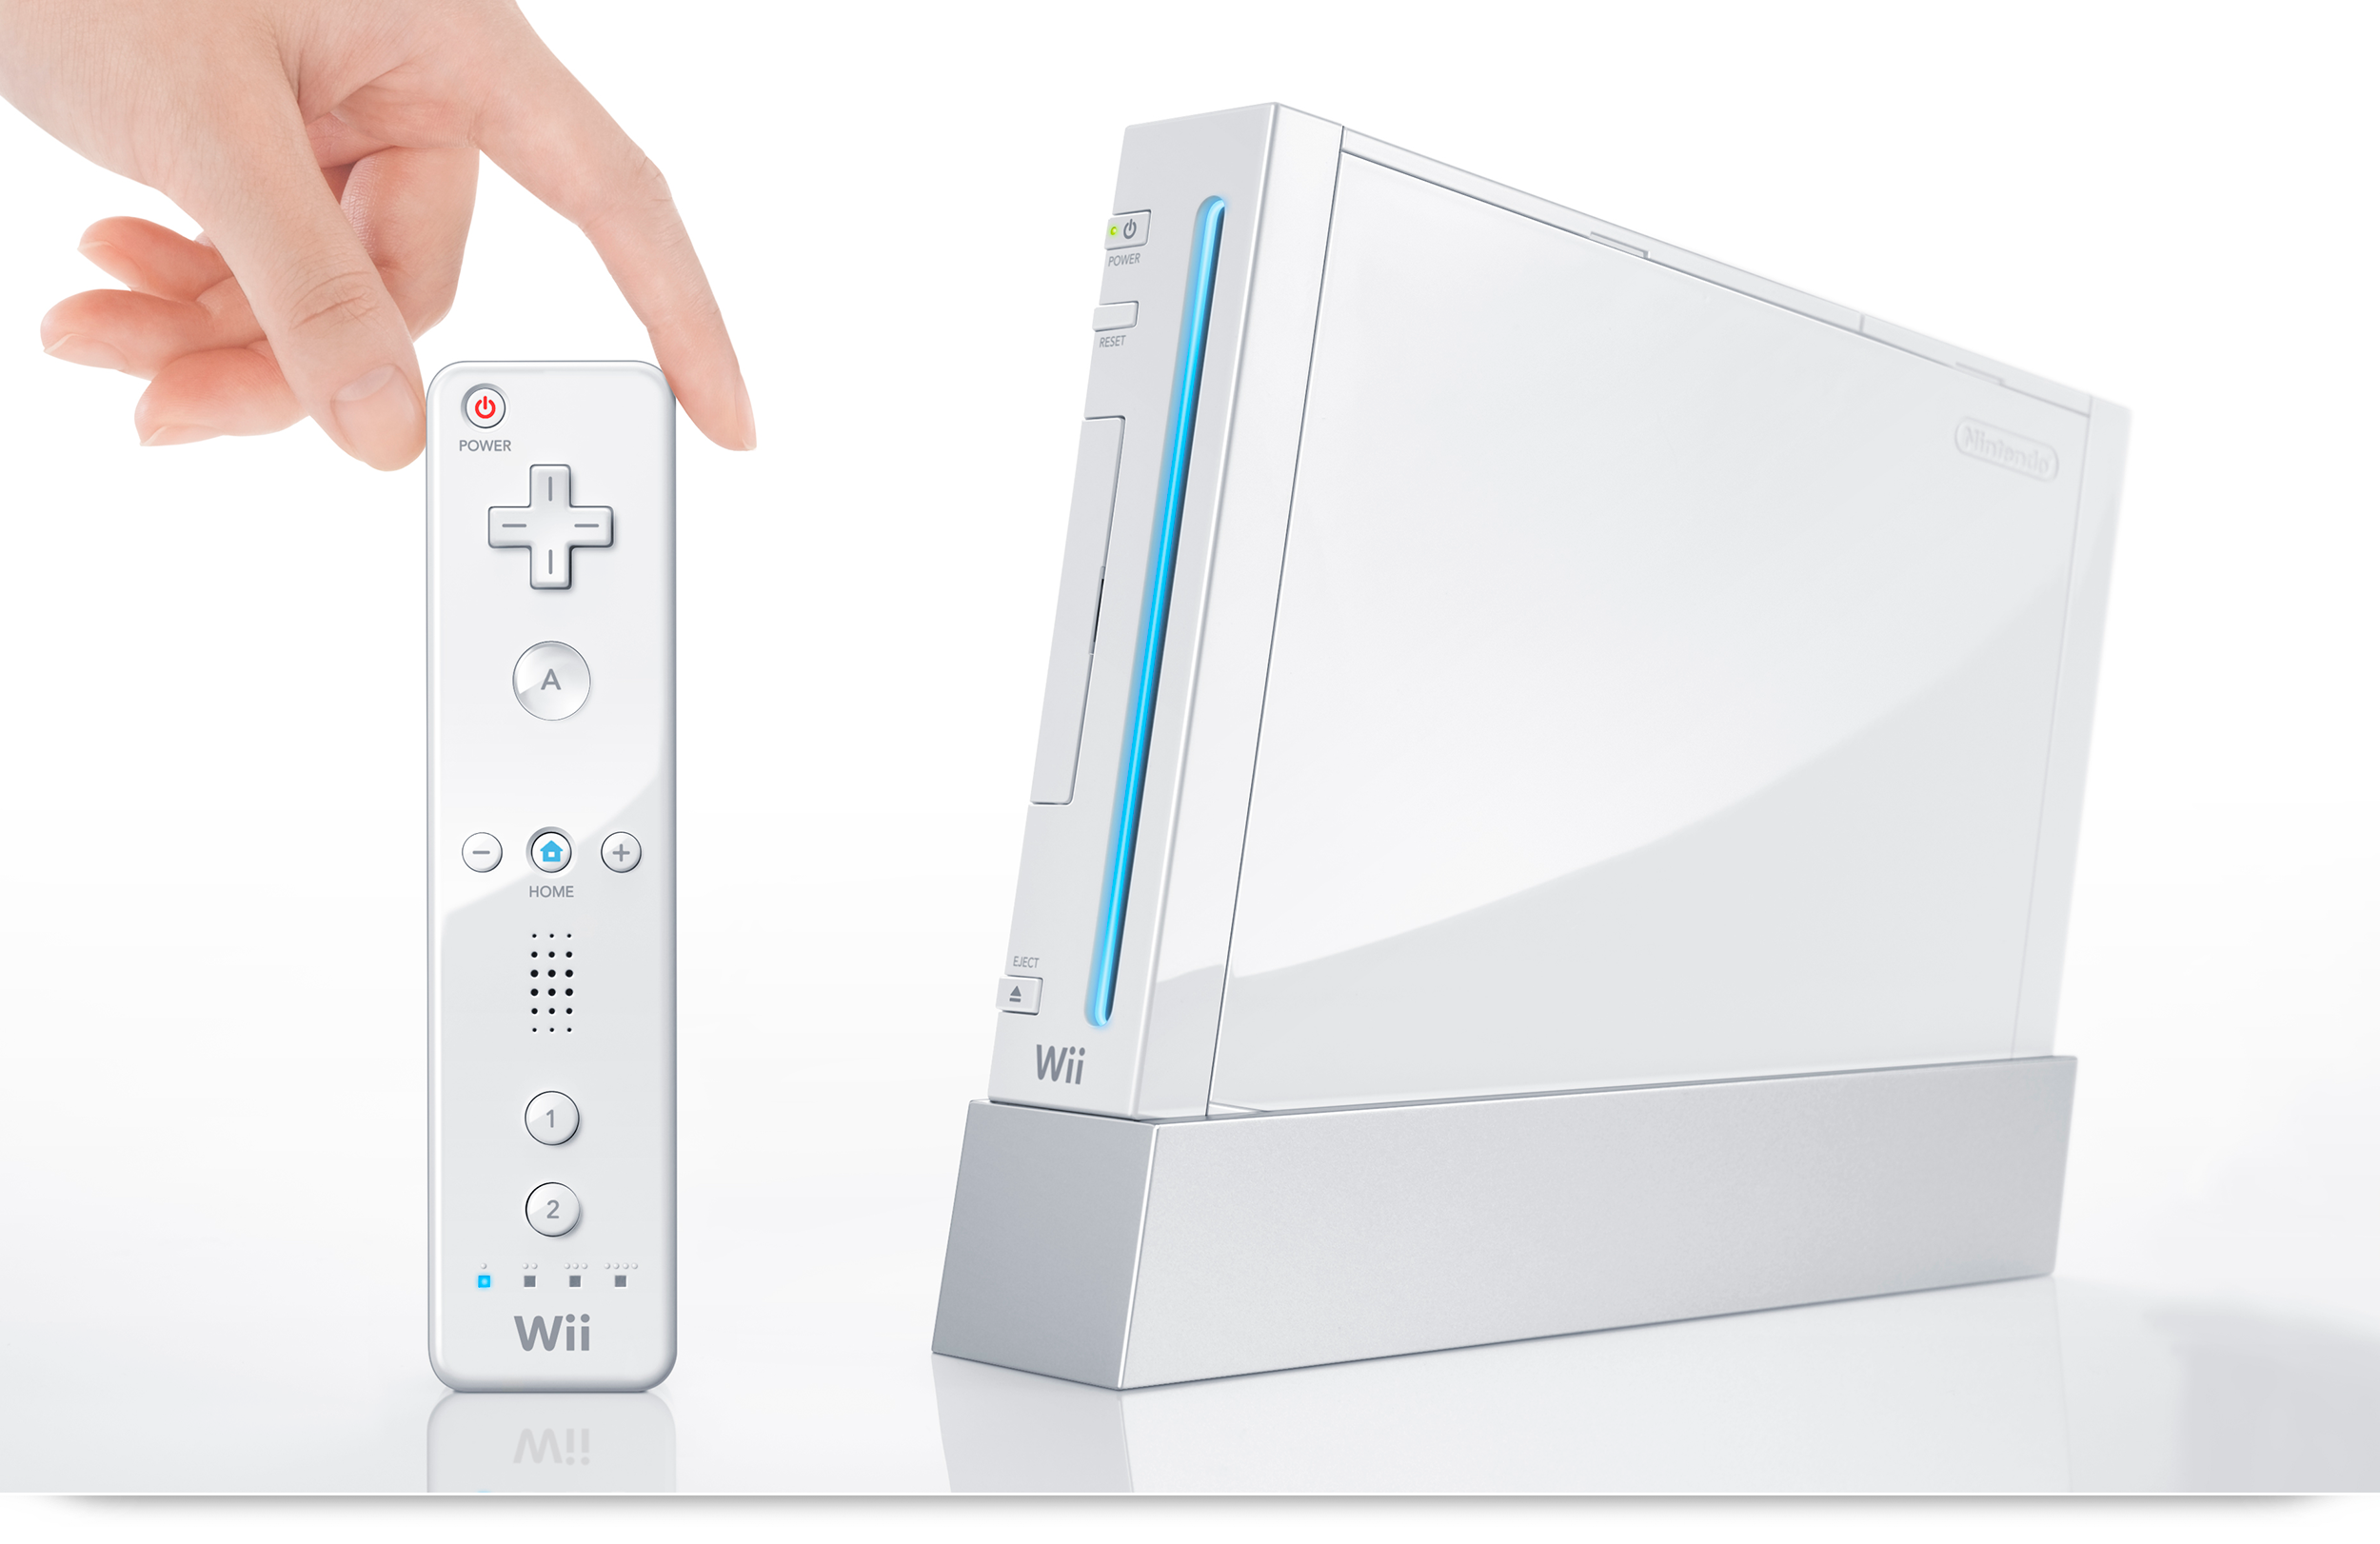 the wii